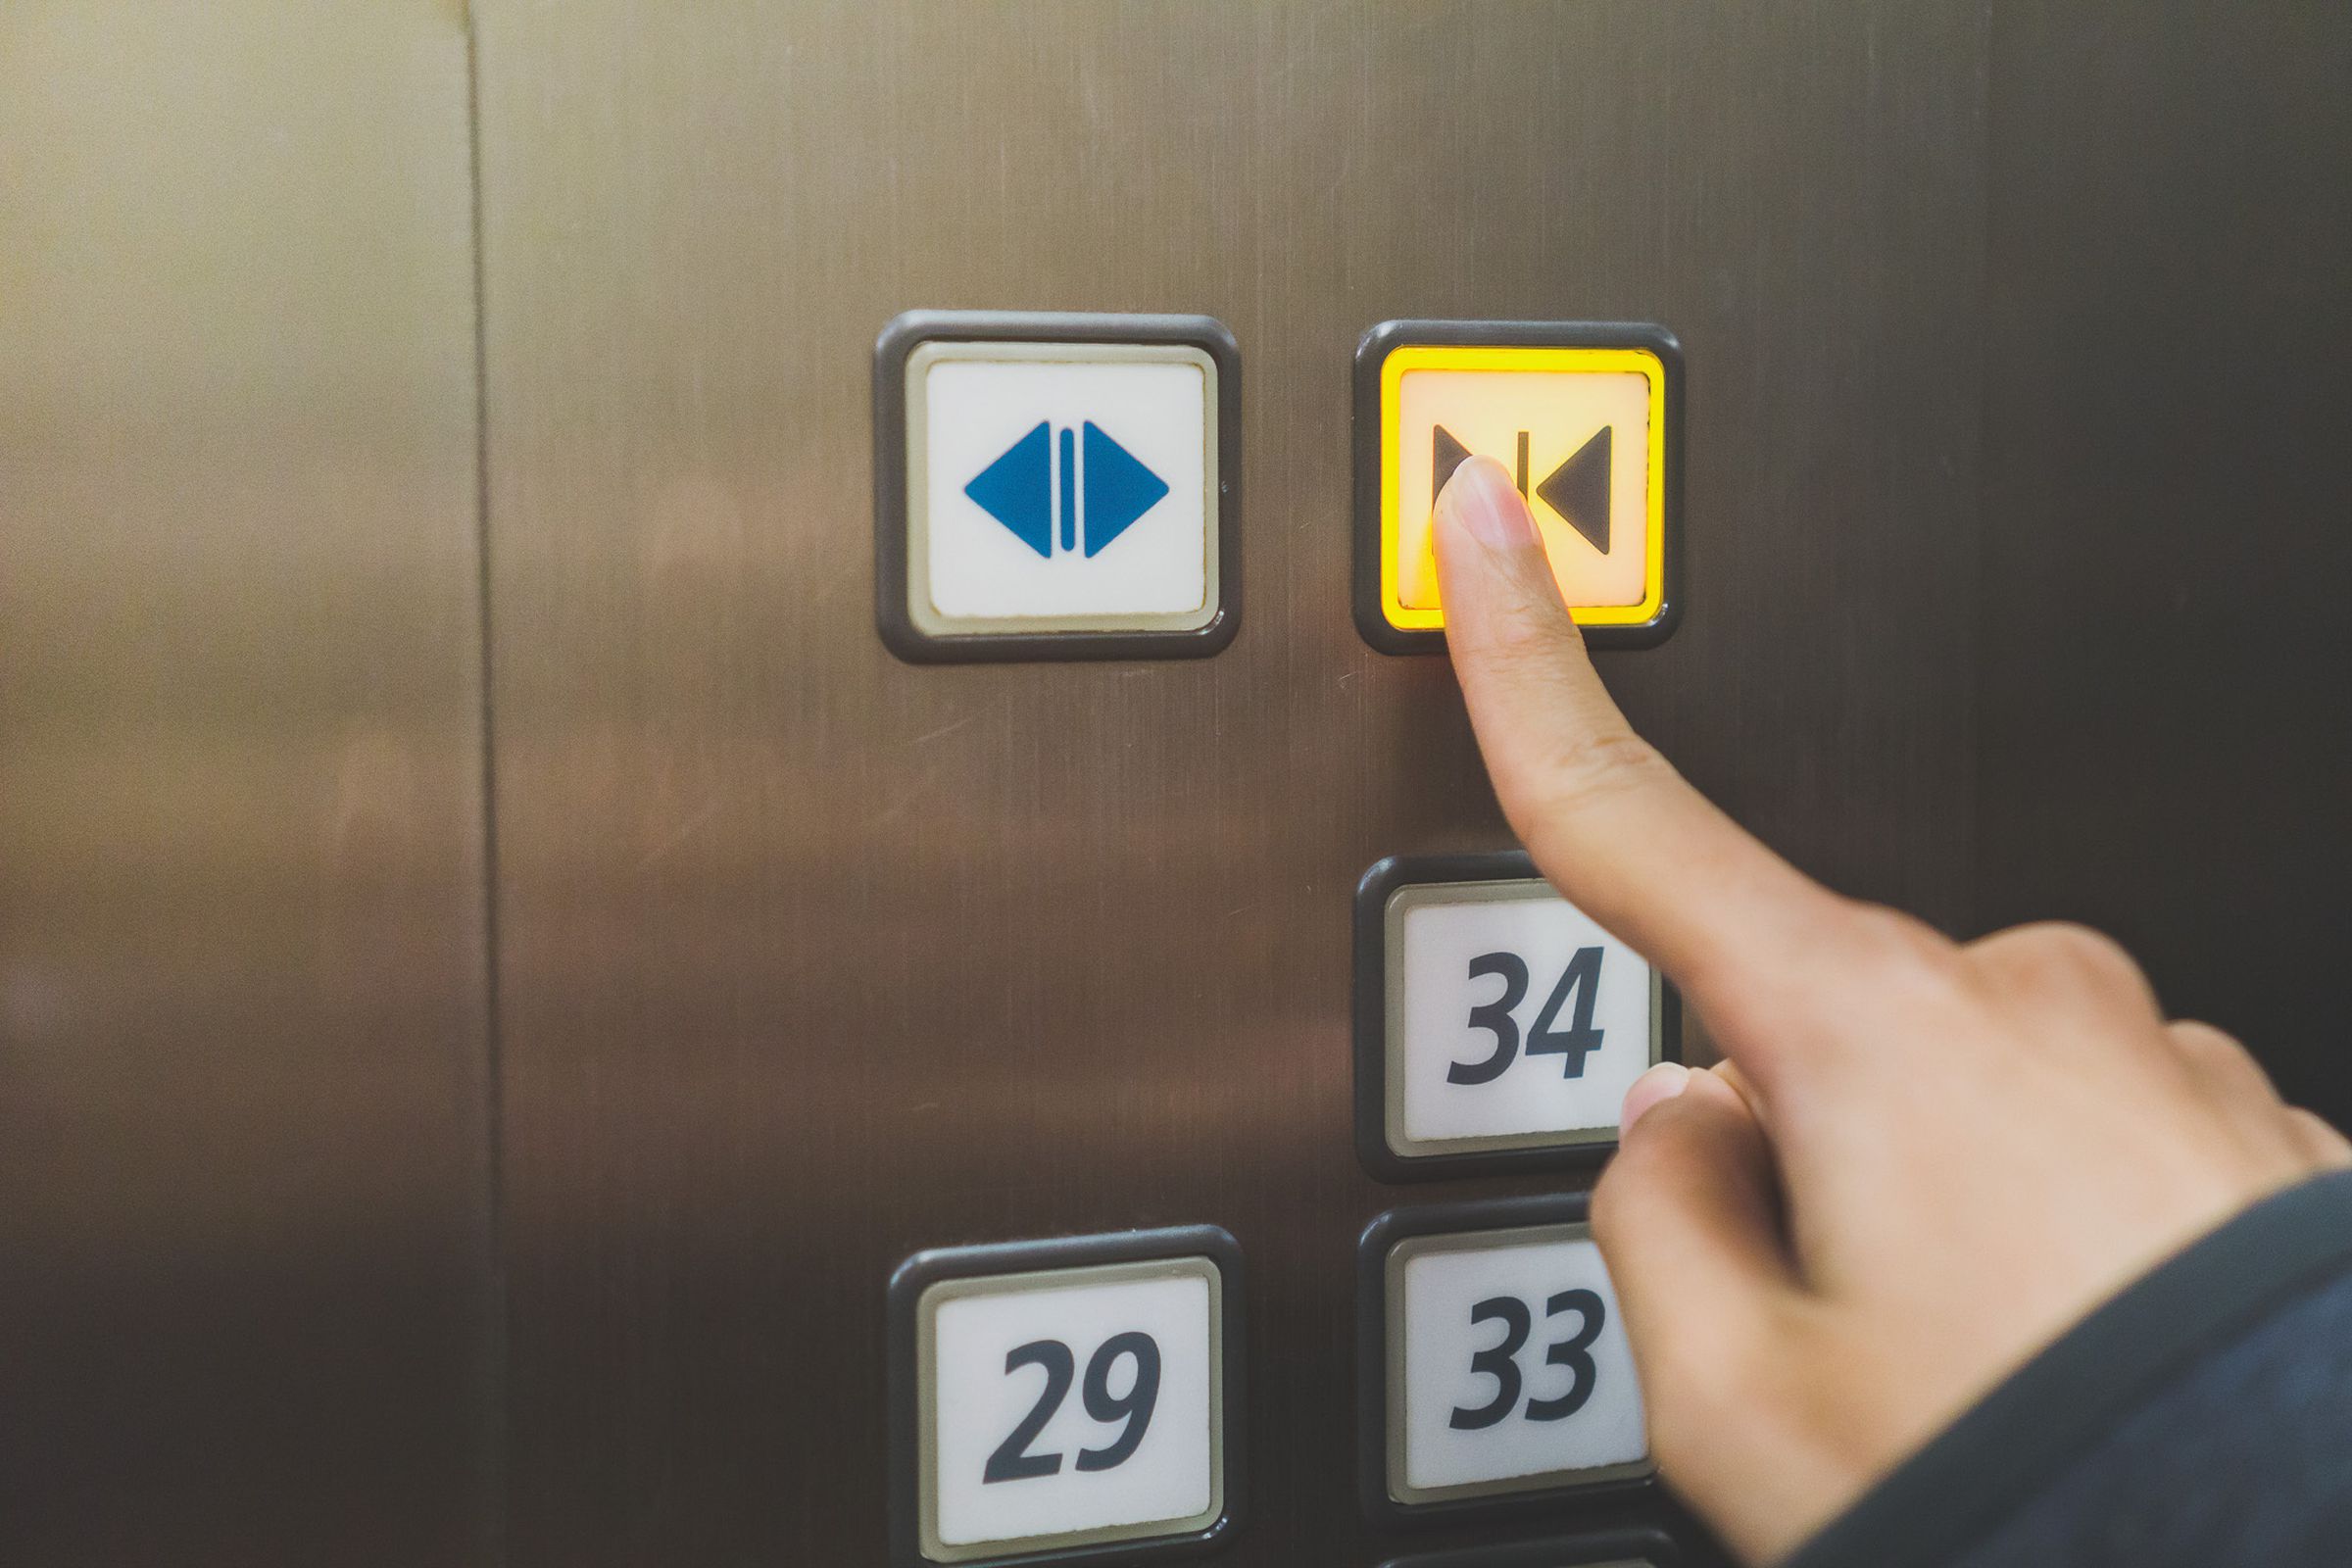 Image of someone pressing the close door button in an elevator.